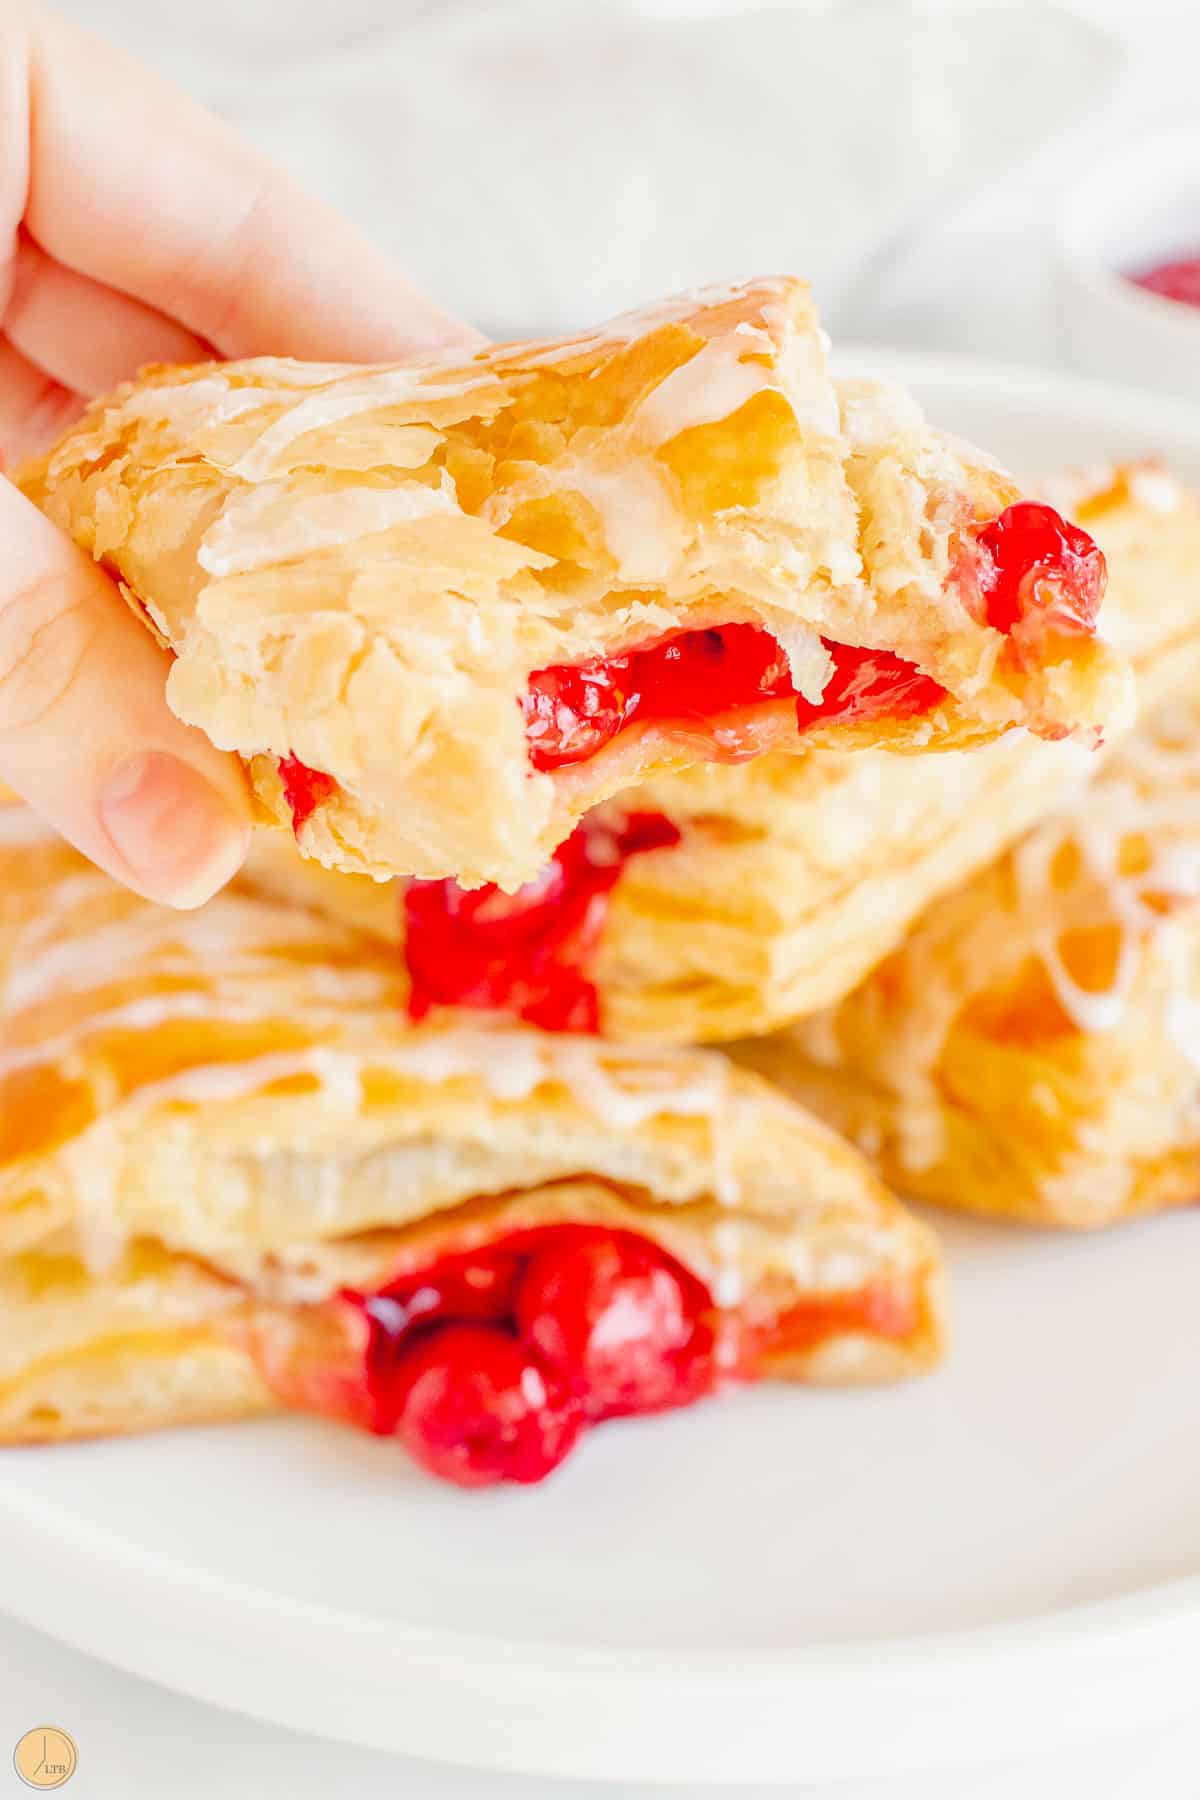 cherry turnover with a bite missing